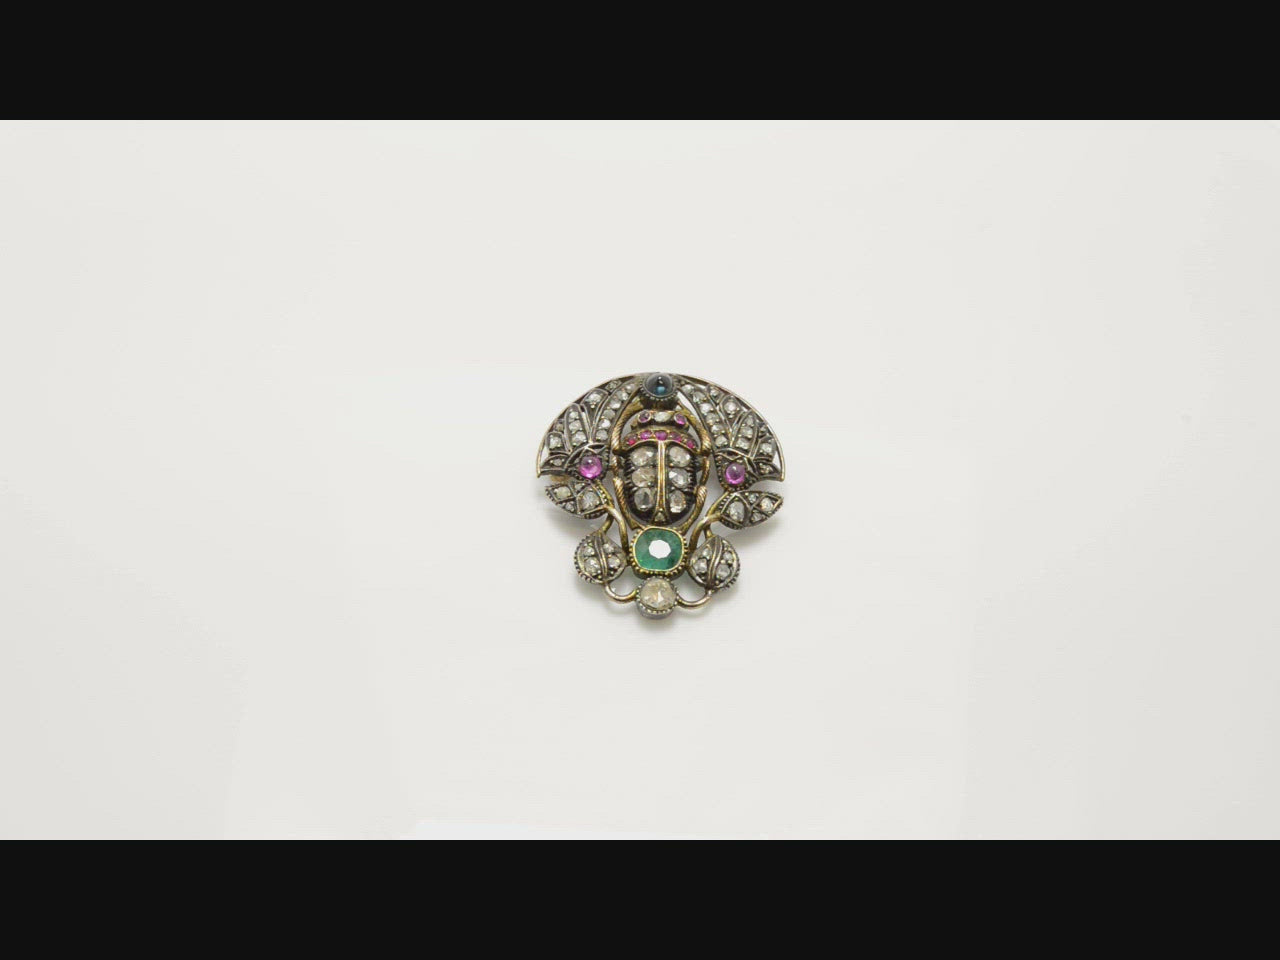 A Victorian, late 1800s silver scarab beetle brooch with gold accents.